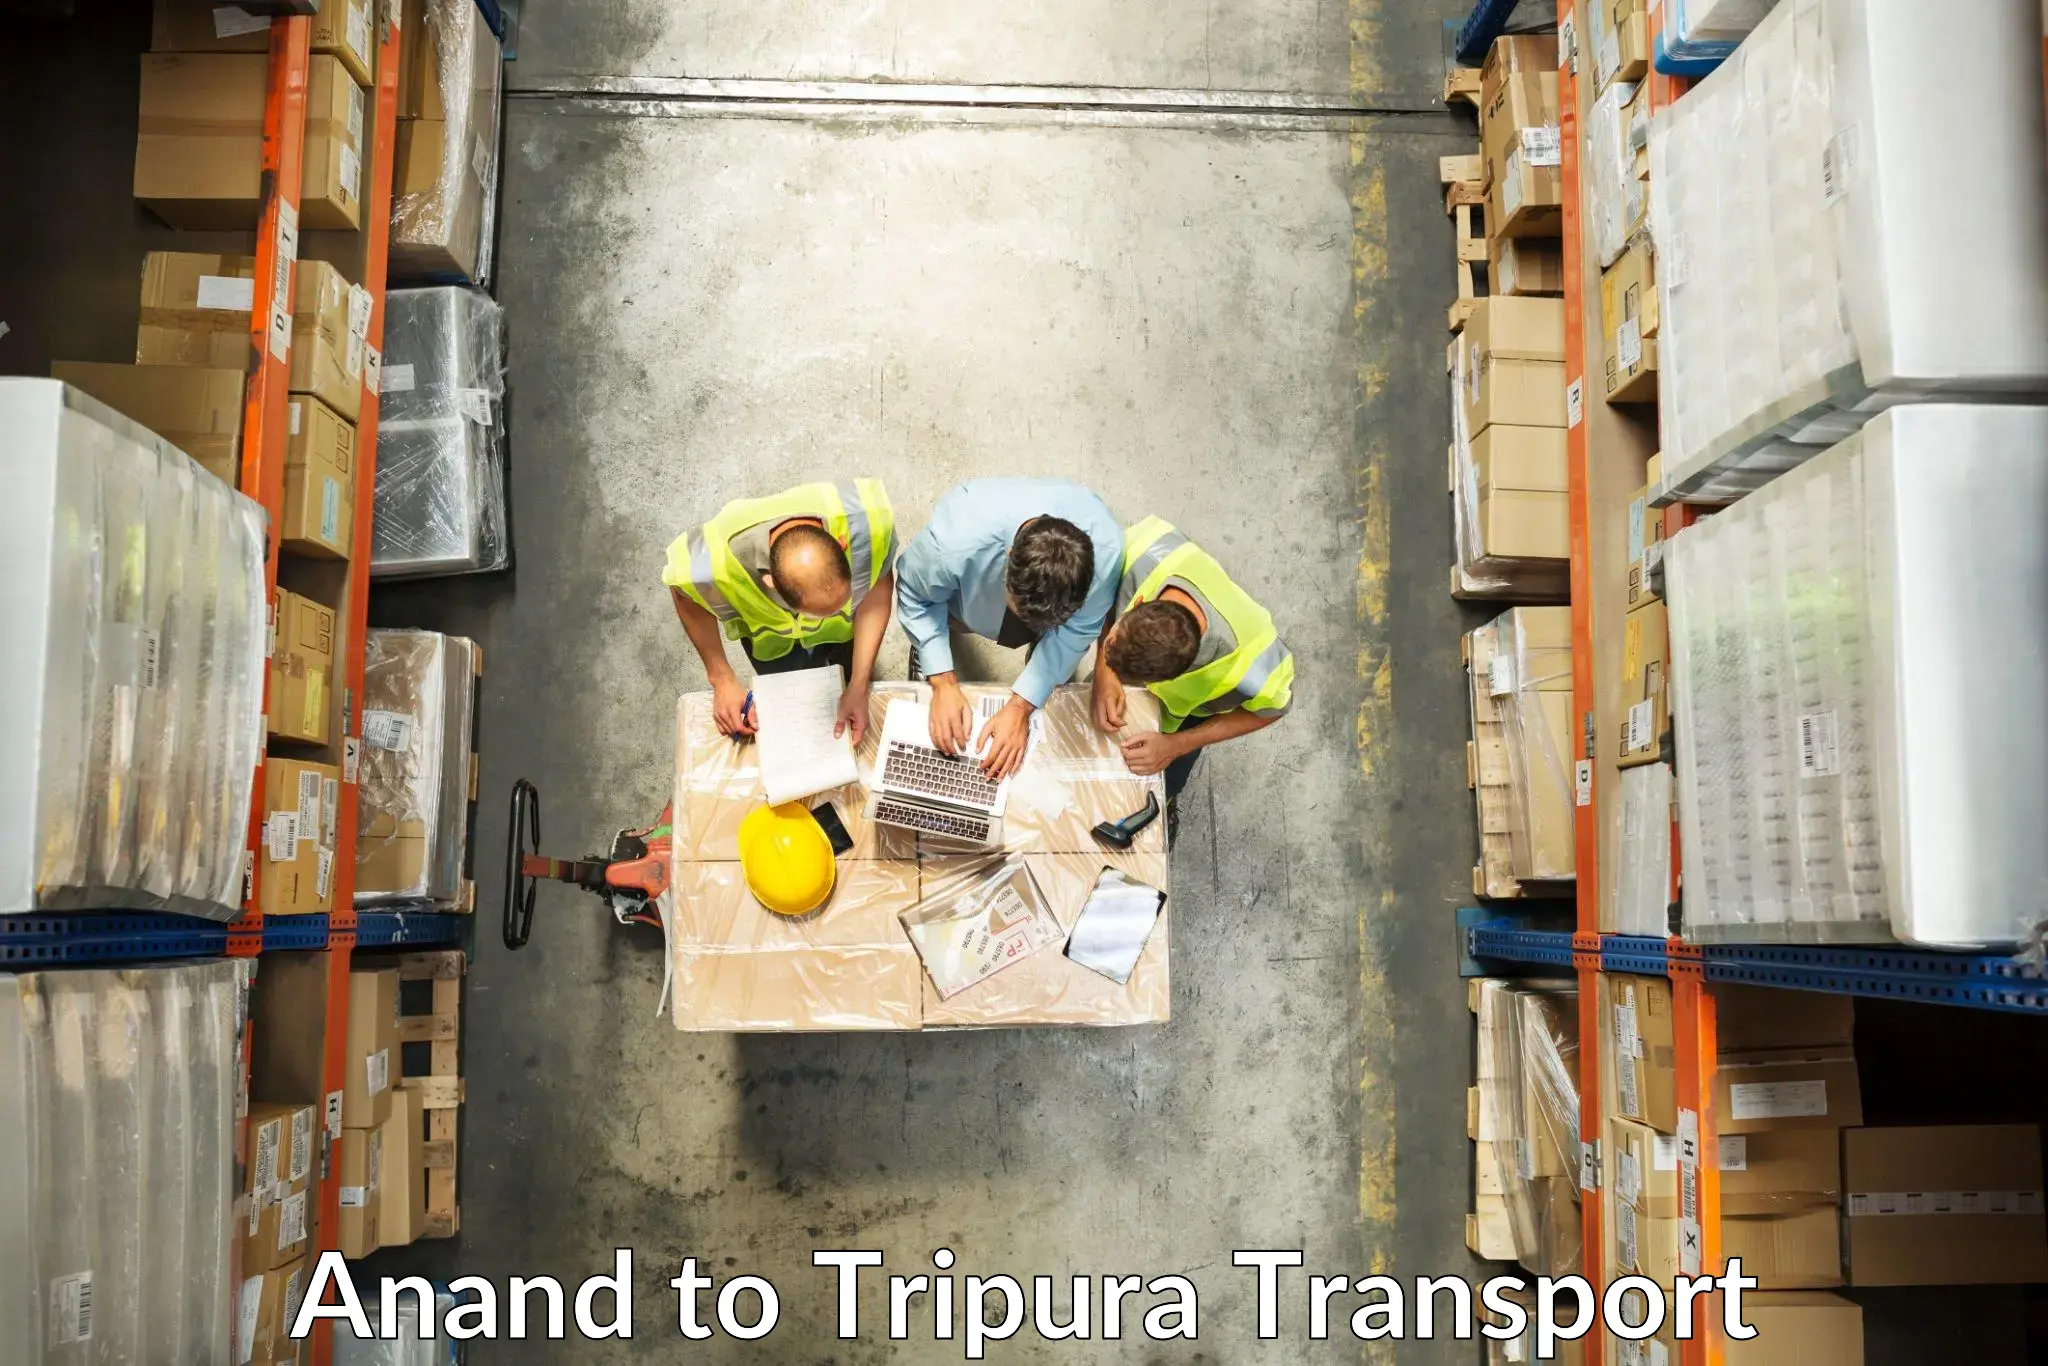 Domestic goods transportation services Anand to Udaipur Tripura